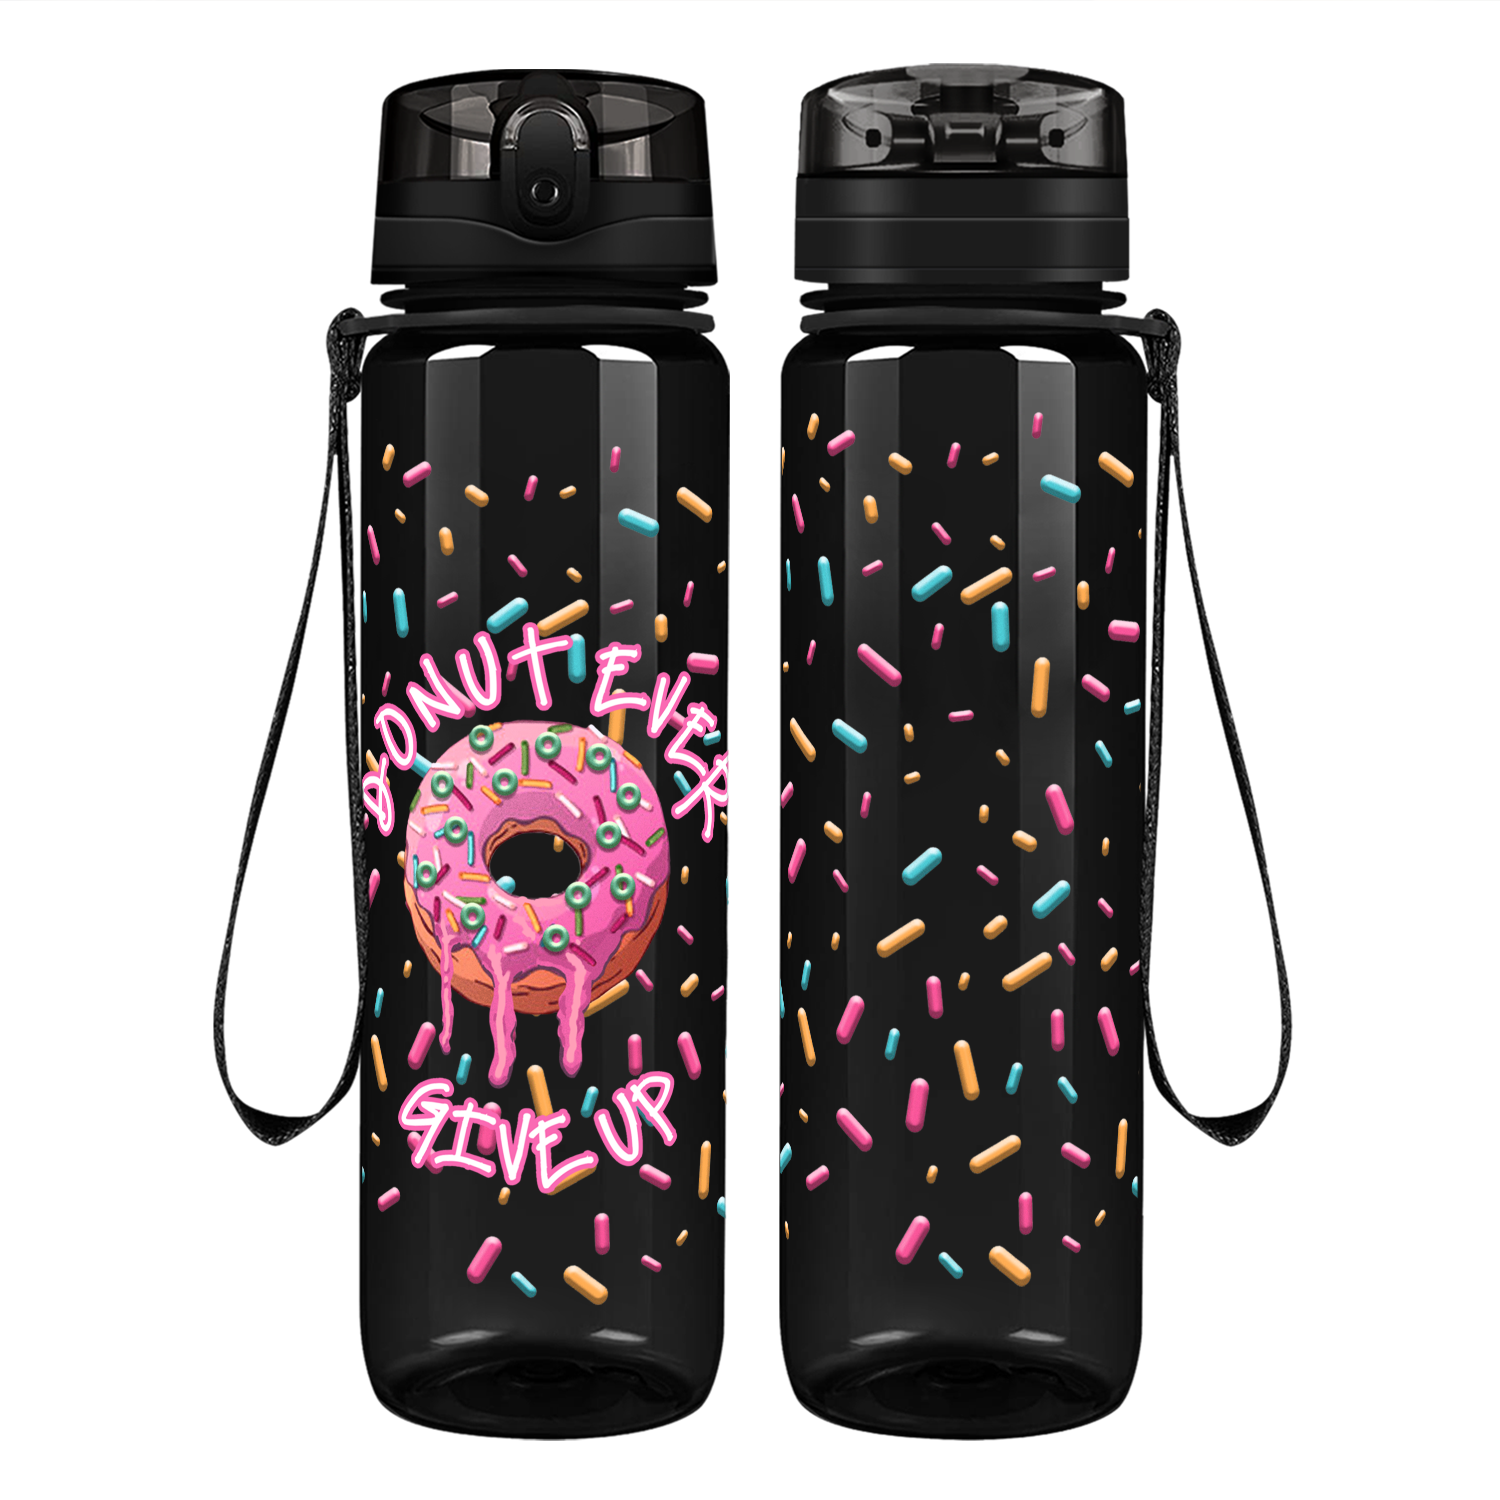 Donut Ever Give Up with Sprinkles on 32 oz Water Bottle